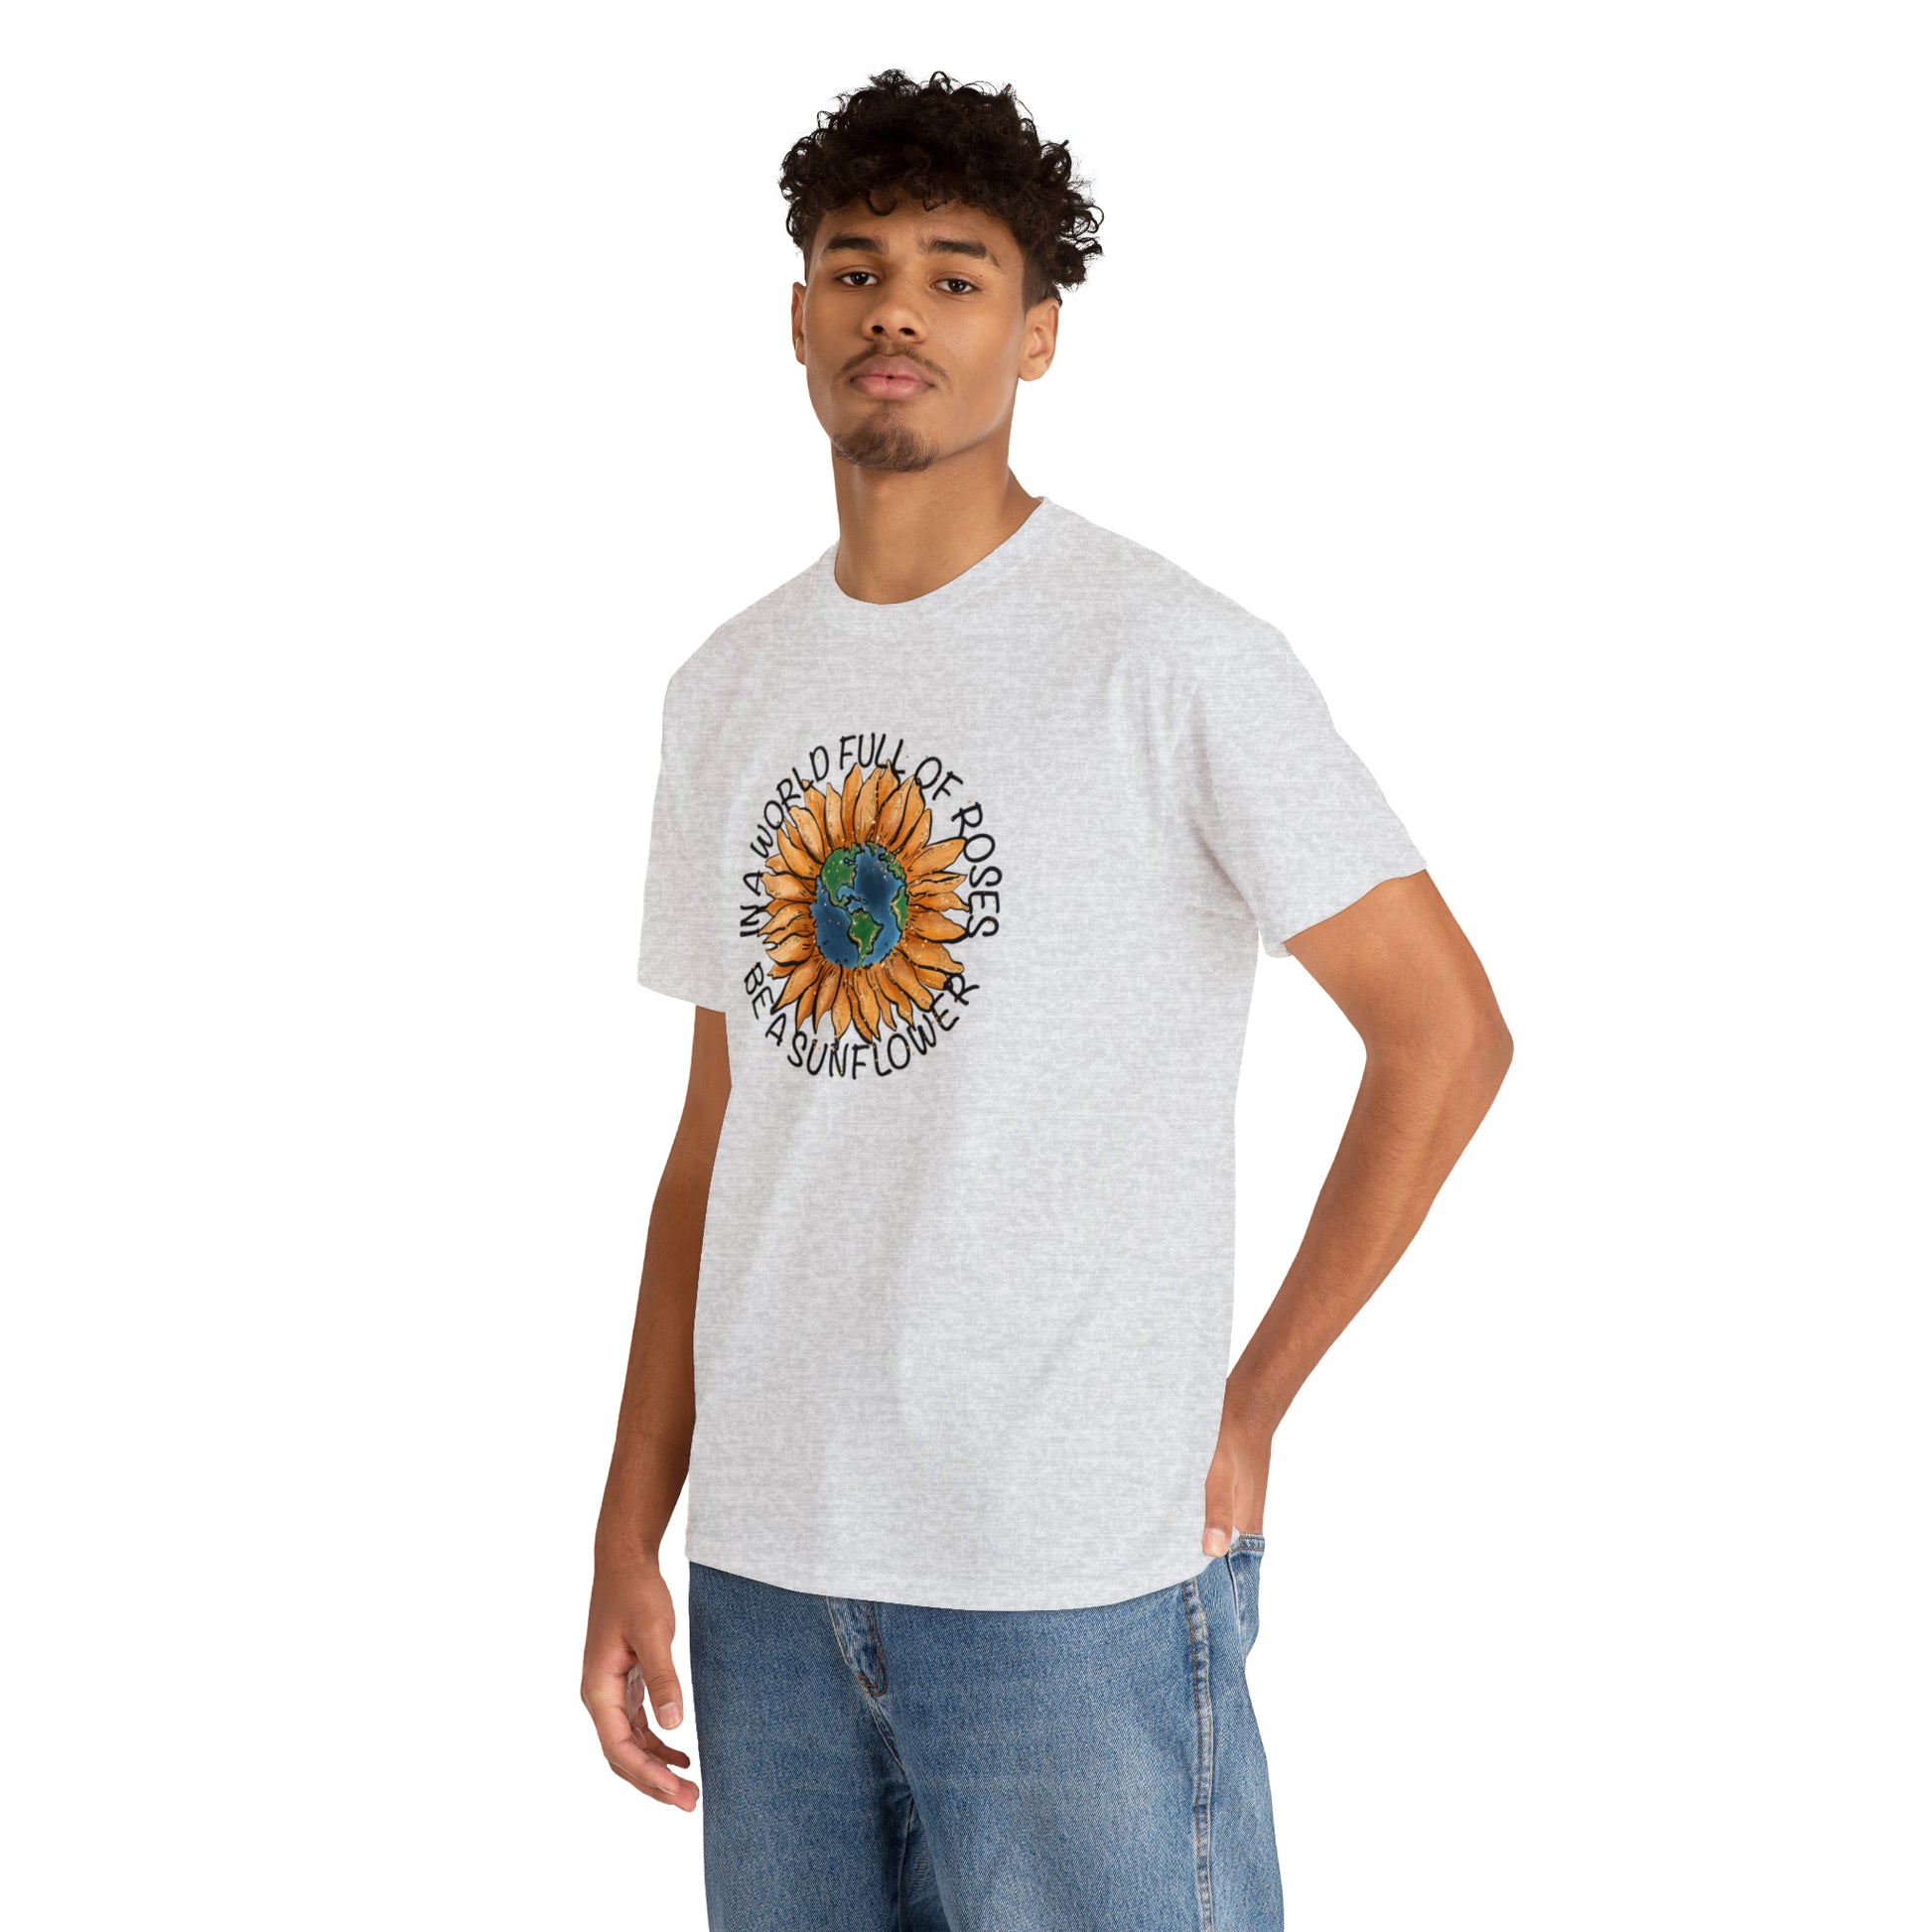 "Be A Sunflower" T-shirt - Weave Got Gifts - Unique Gifts You Won’t Find Anywhere Else!